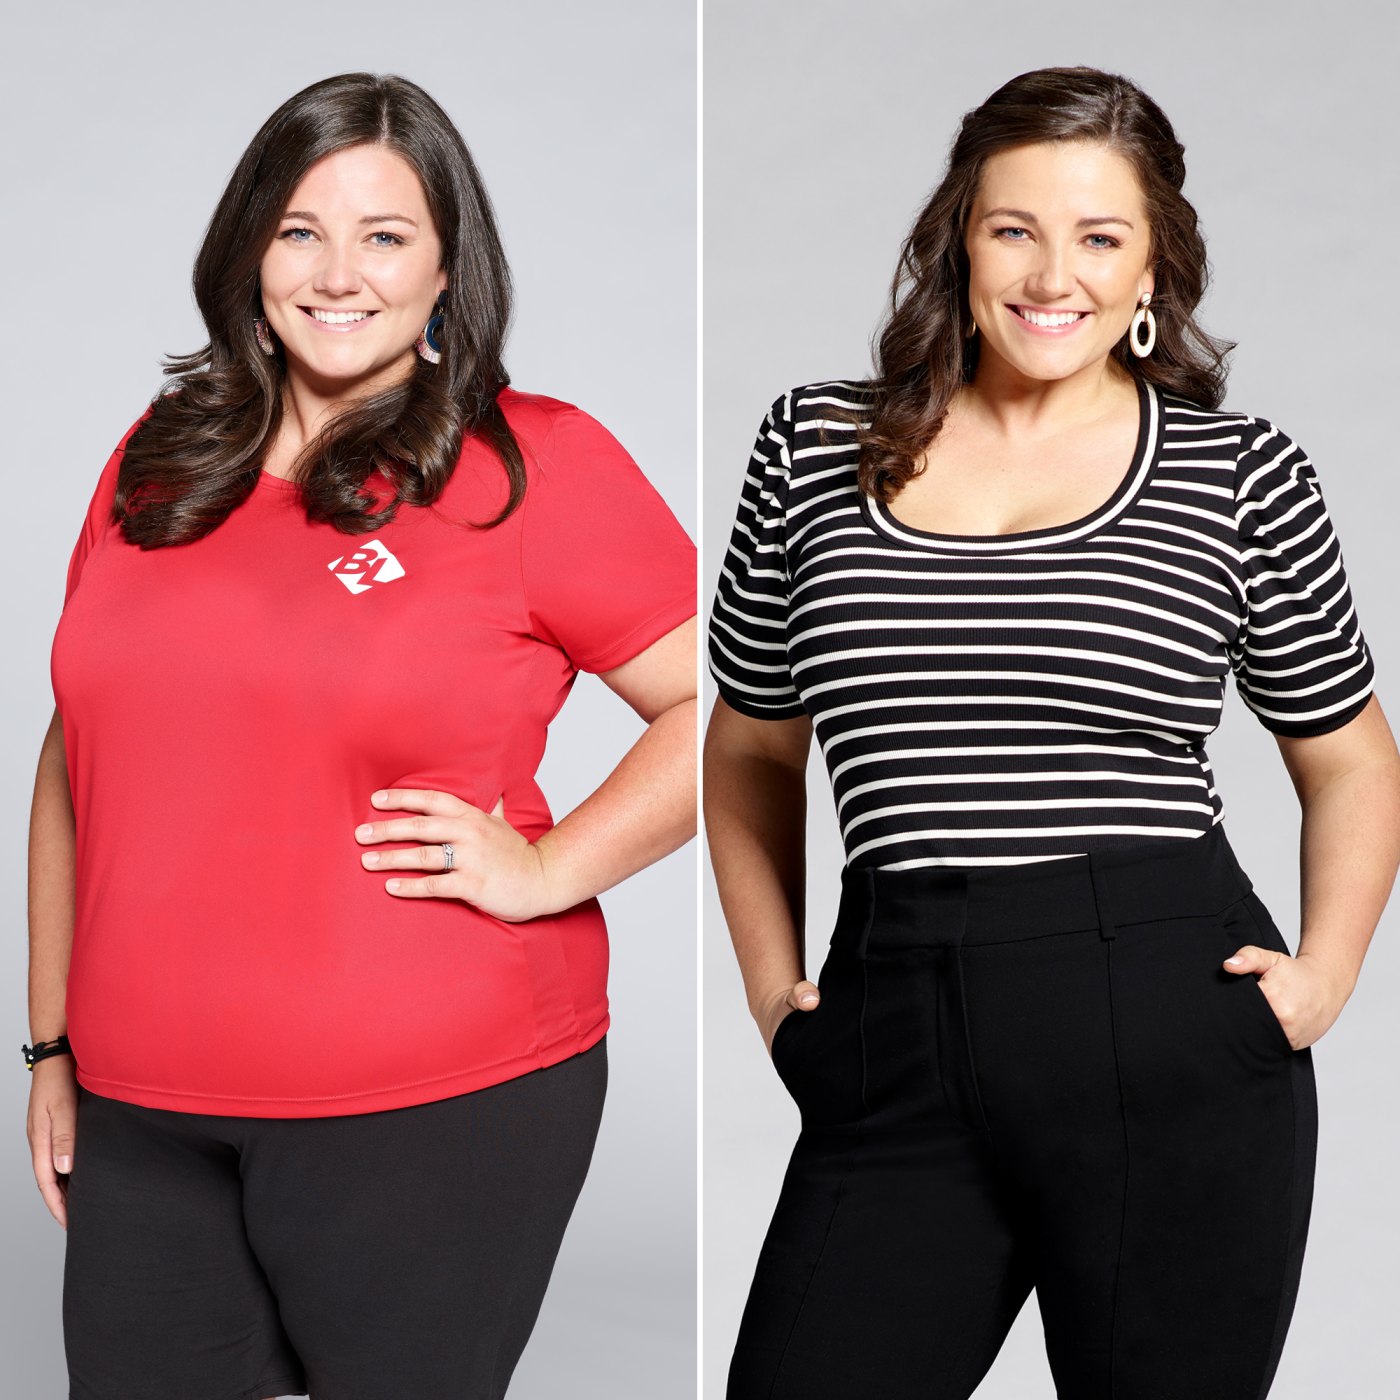 'The Biggest Loser’ Cast See Before, After Pictures Us Weekly